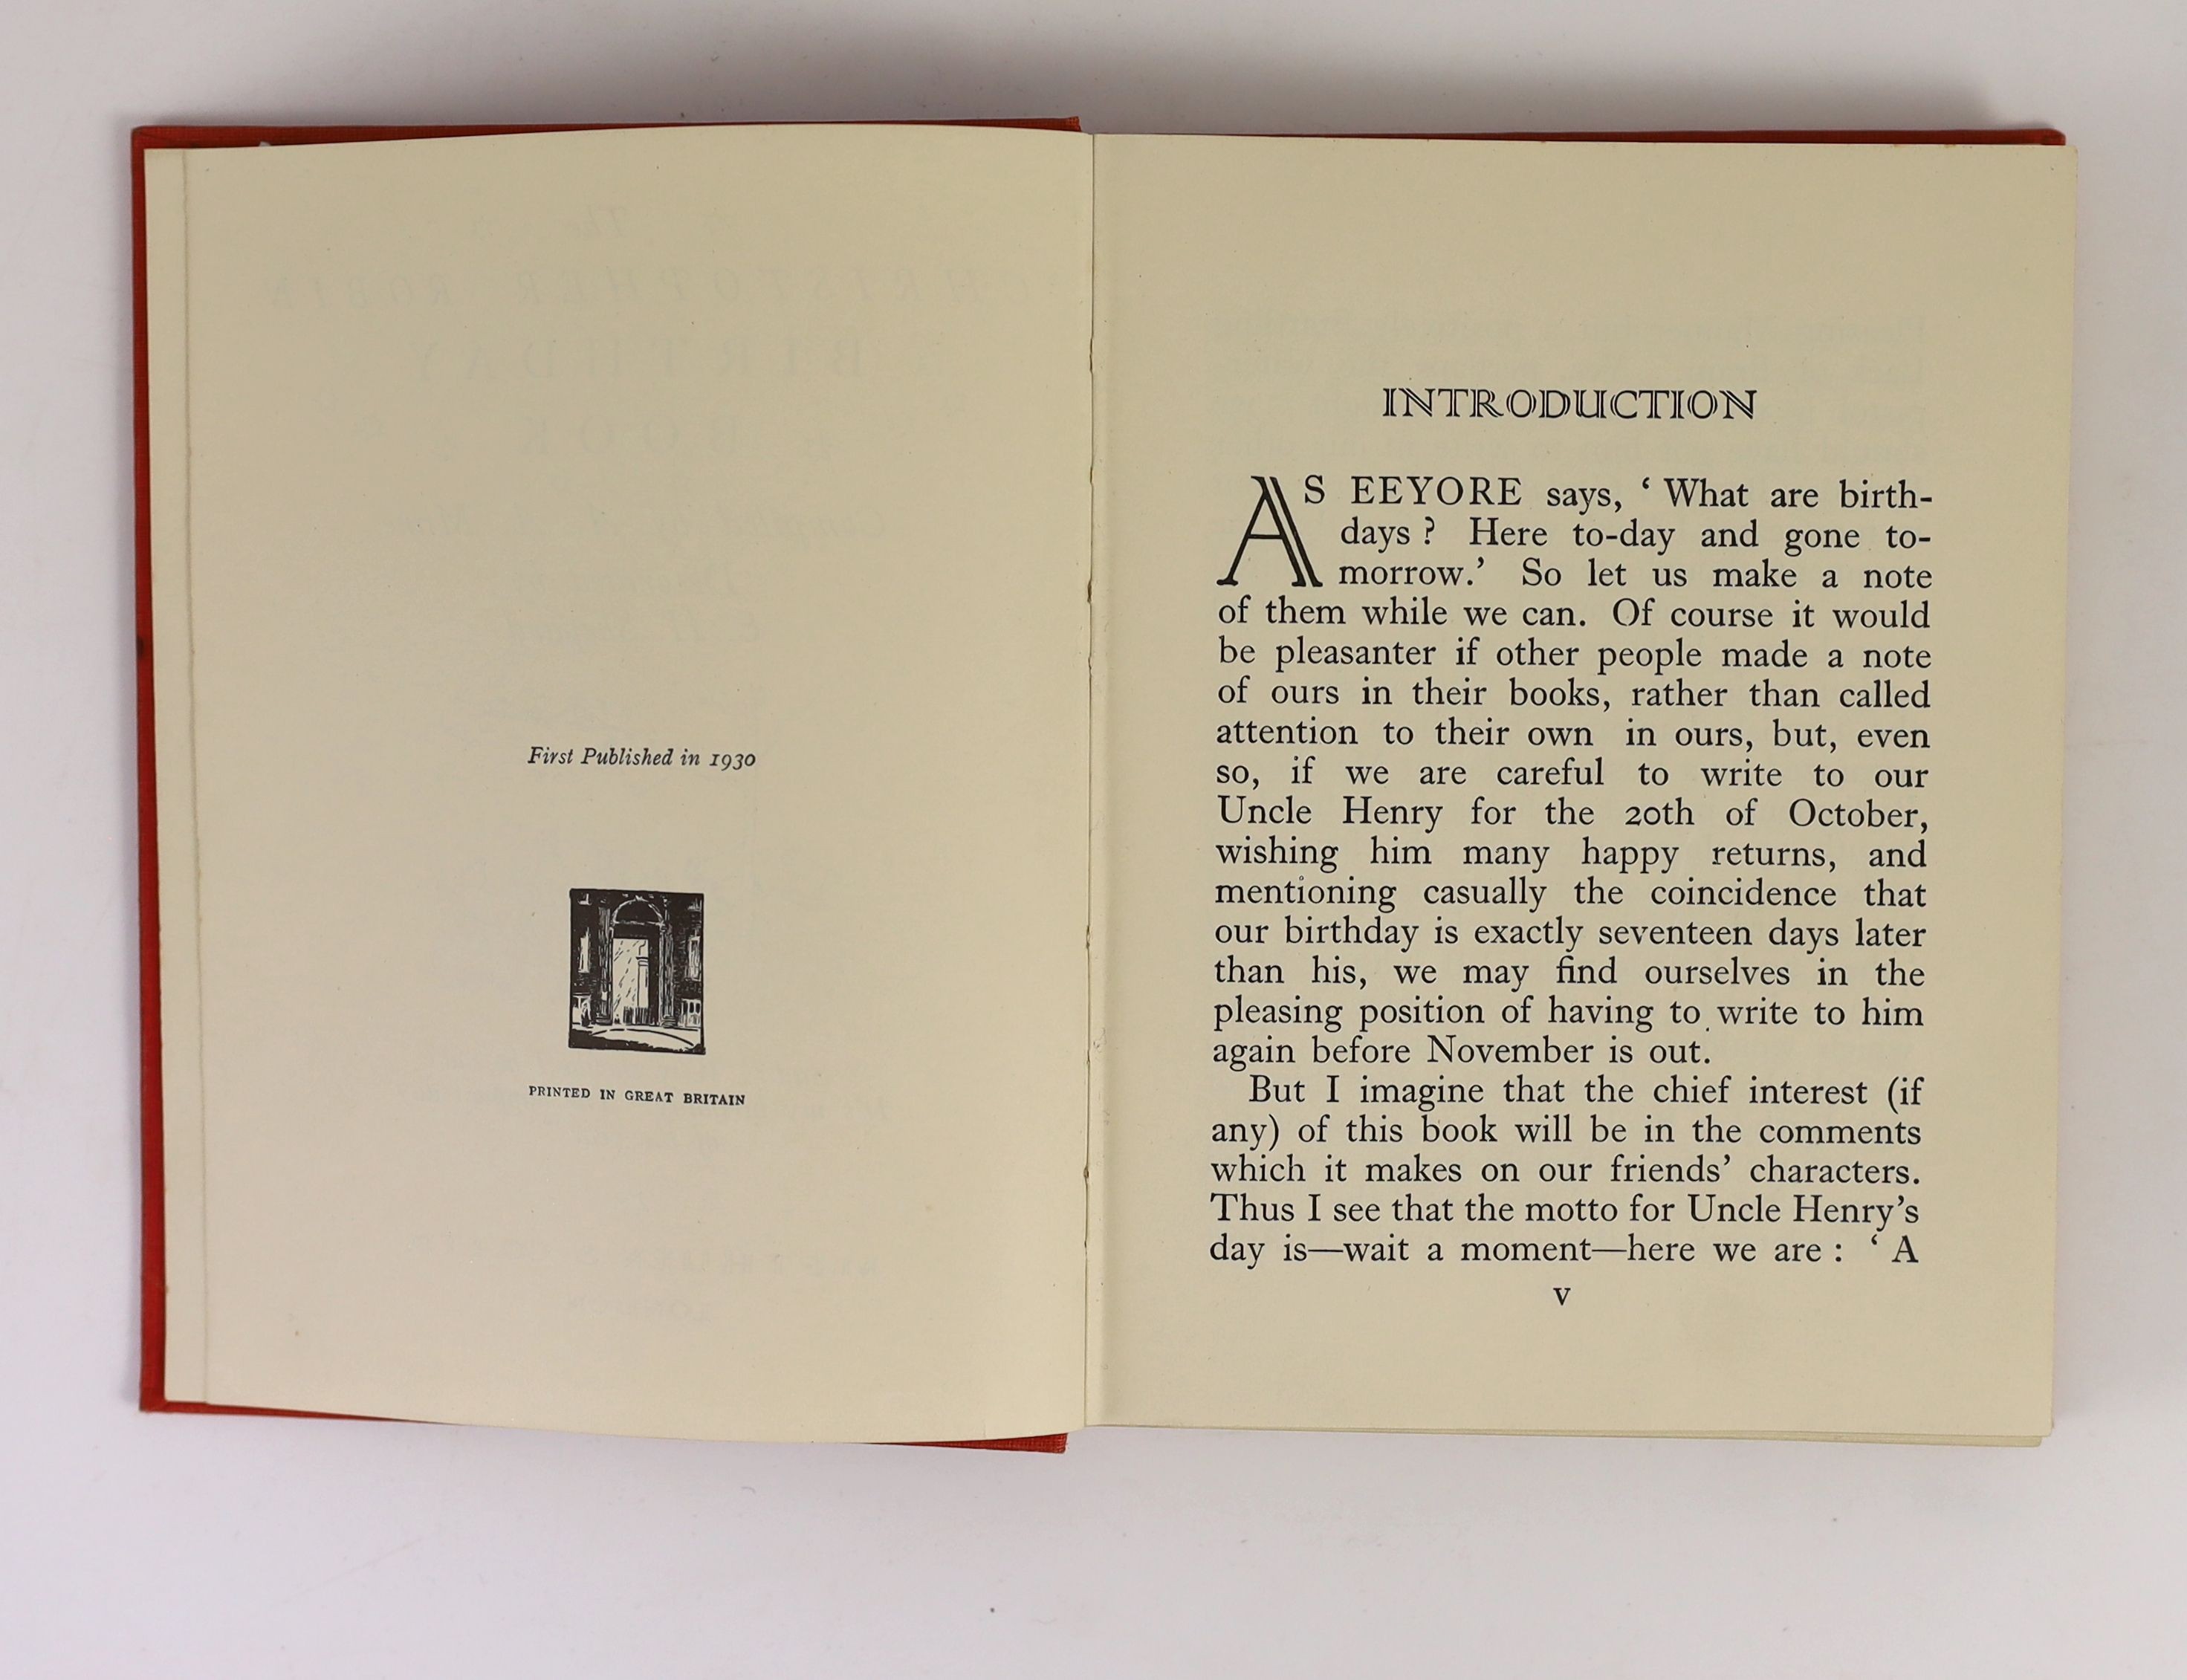 Dr. Marie Stopes interest - Milne. A. A - The Christopher Robin Birthday Book, 1st edition, with two signatures of Dr. Stopes, for the dates 13th October and 15th October [her birthday], formerly in the ownership of her